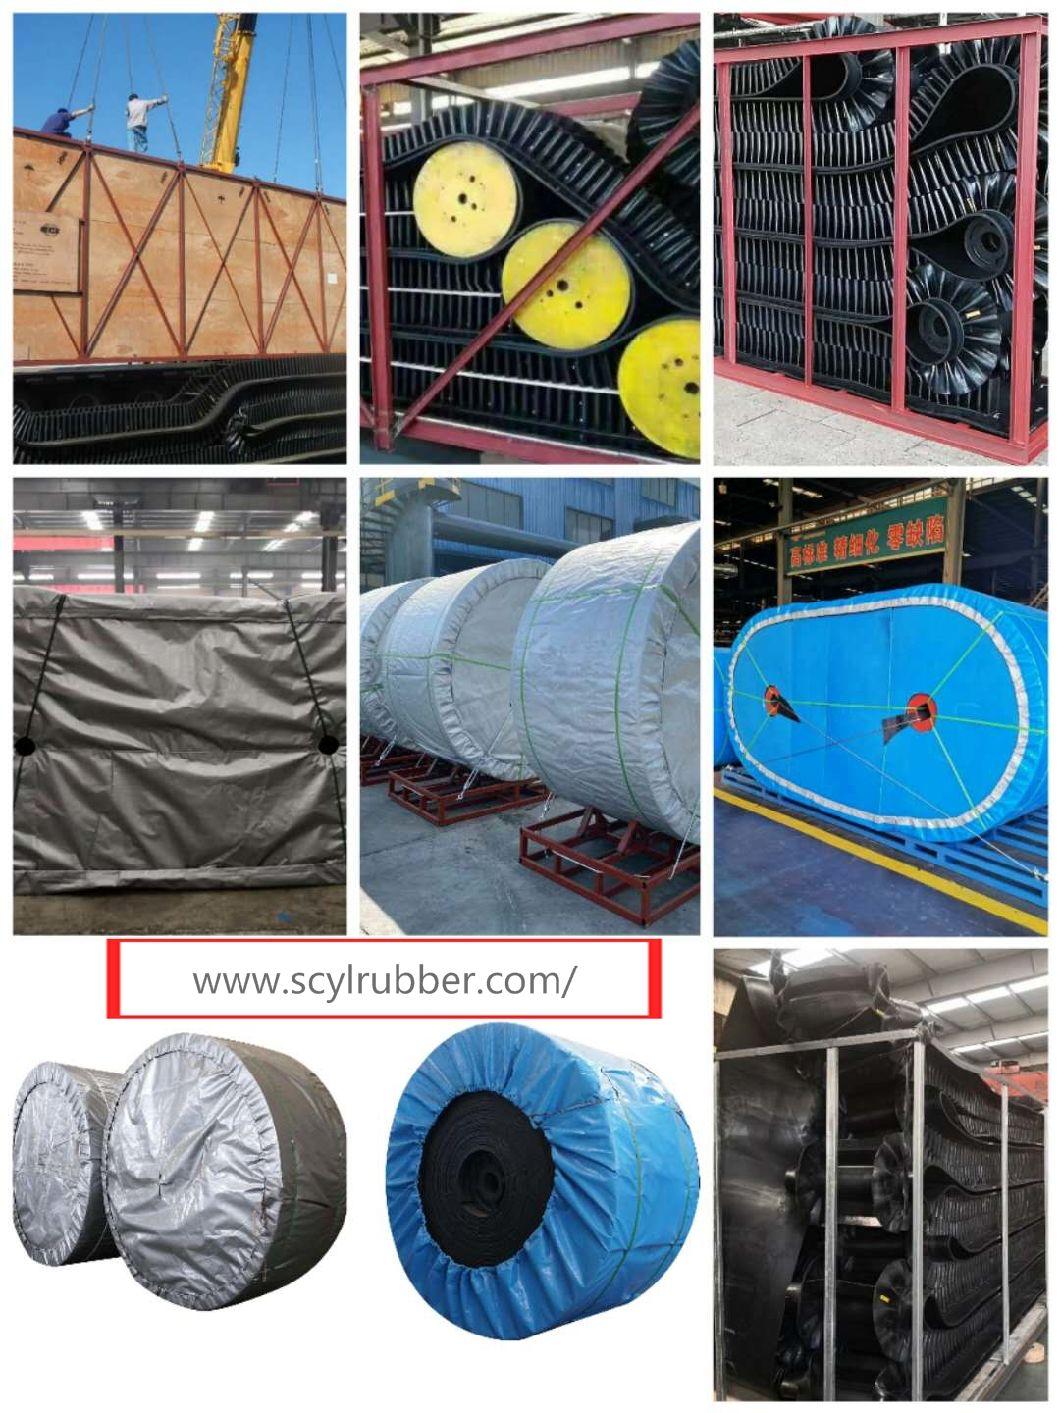 90 Degree Inclined Sidewall Conveyor Belting with High Rubber Cover Grade for Steel Plants